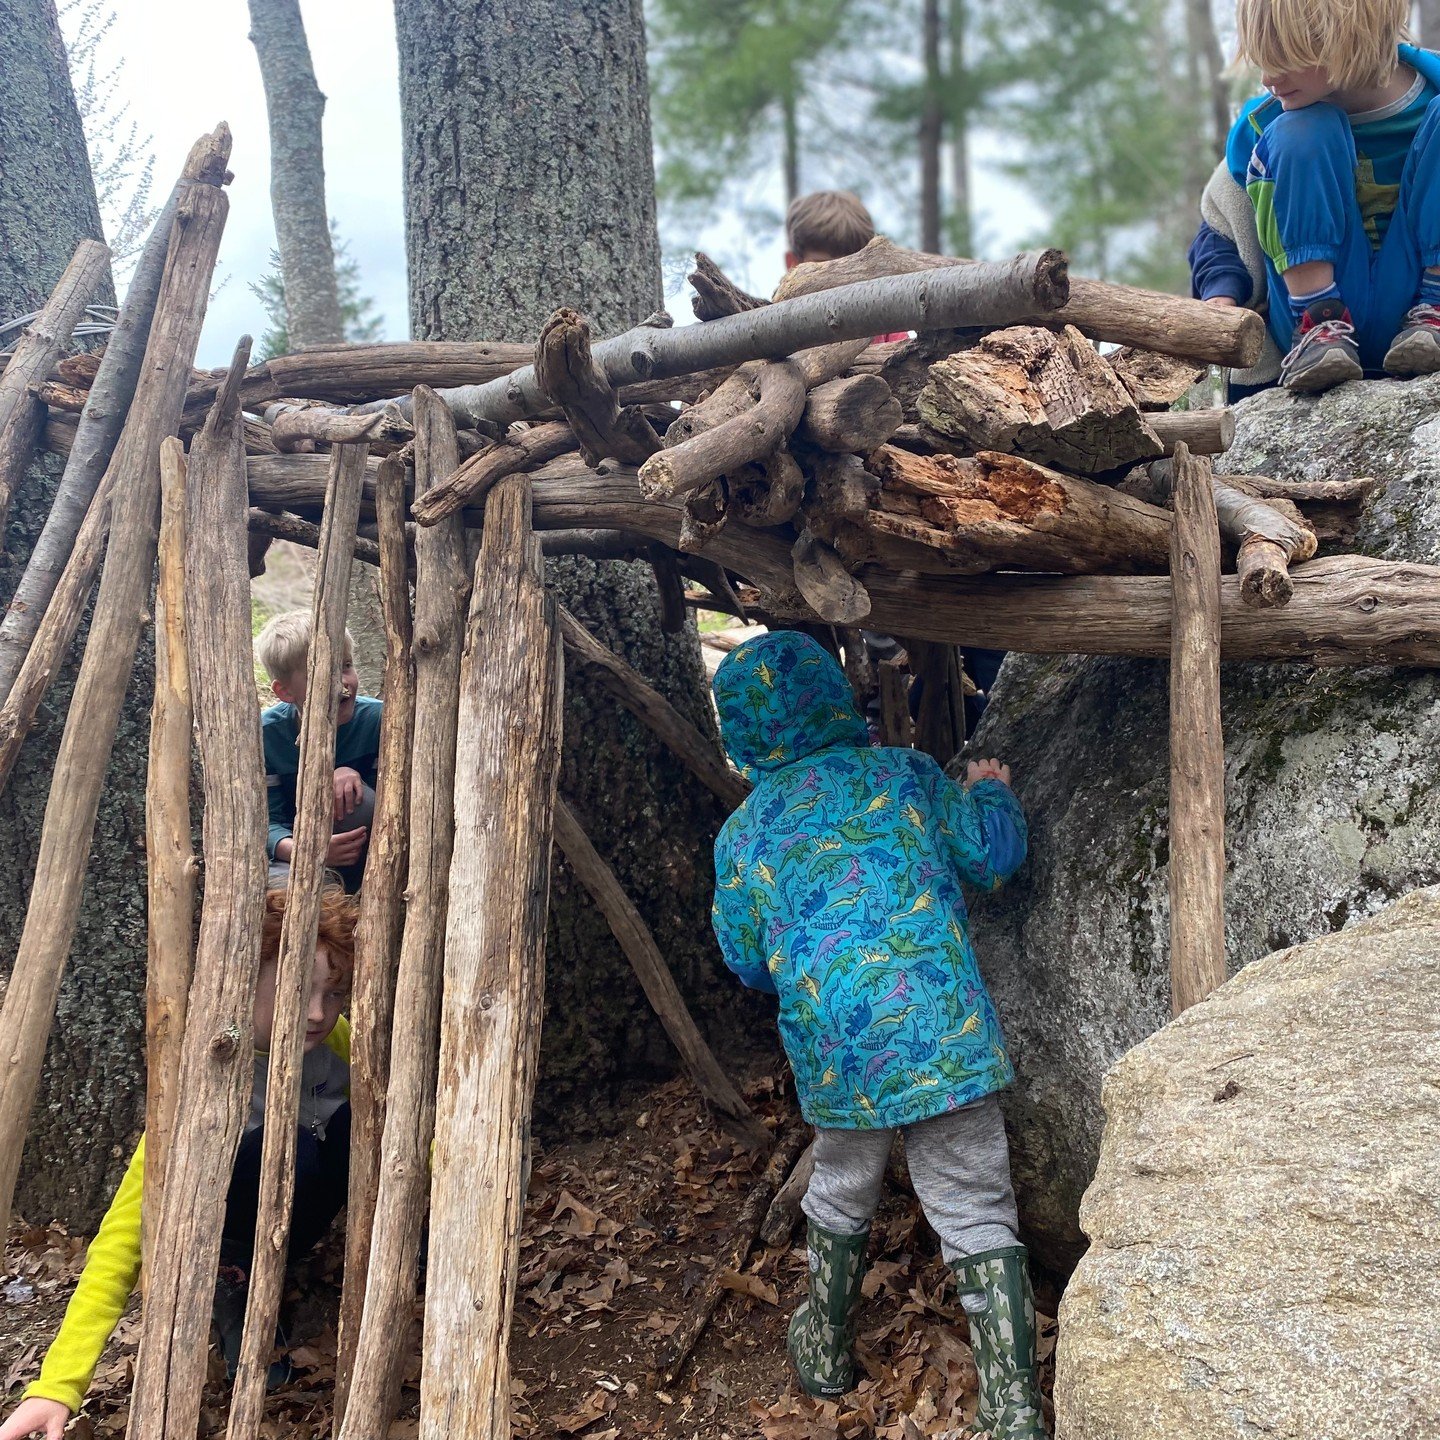 One of Birches' many forts was under extensive renovation today, thanks to a hard-working team of PreK and K-1 students! Negotiating, planning, experimenting, collaborating, problem-solving, communicating--all of these essential skills were on displa